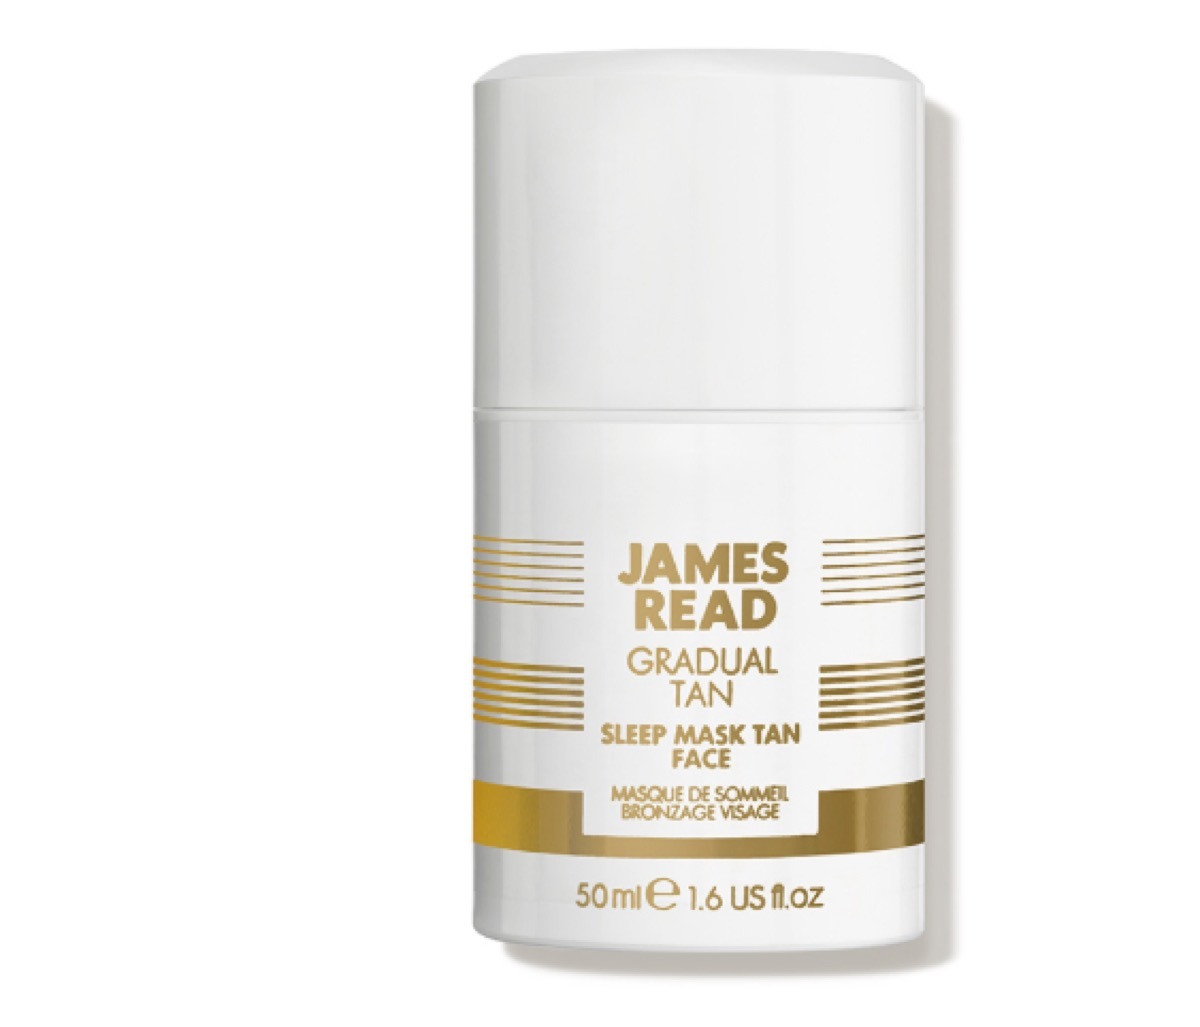 james read overnight tan derm store, summer beauty products